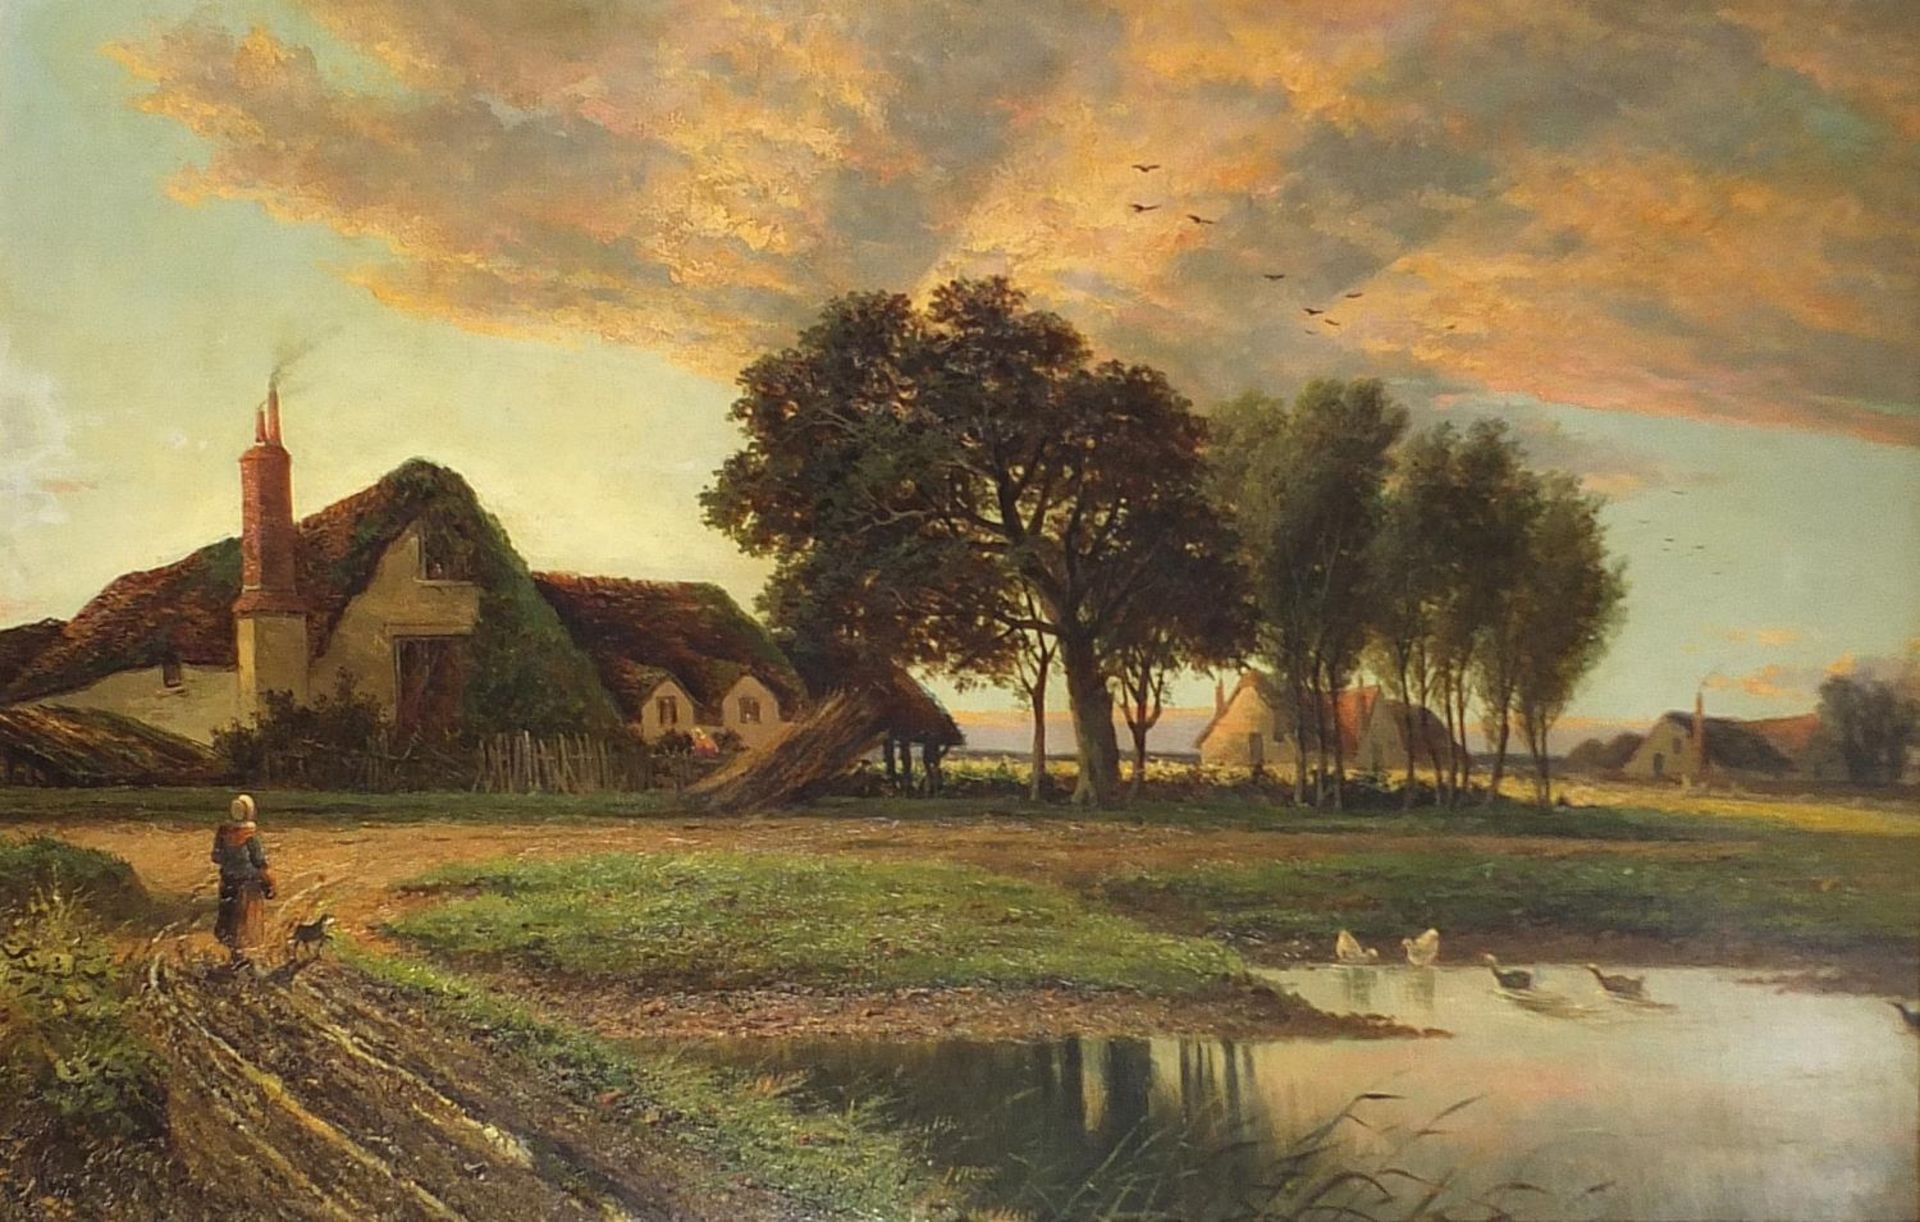 Attributed to Benjamin Williams Leader - Figure before cottages and trees, 19th century English